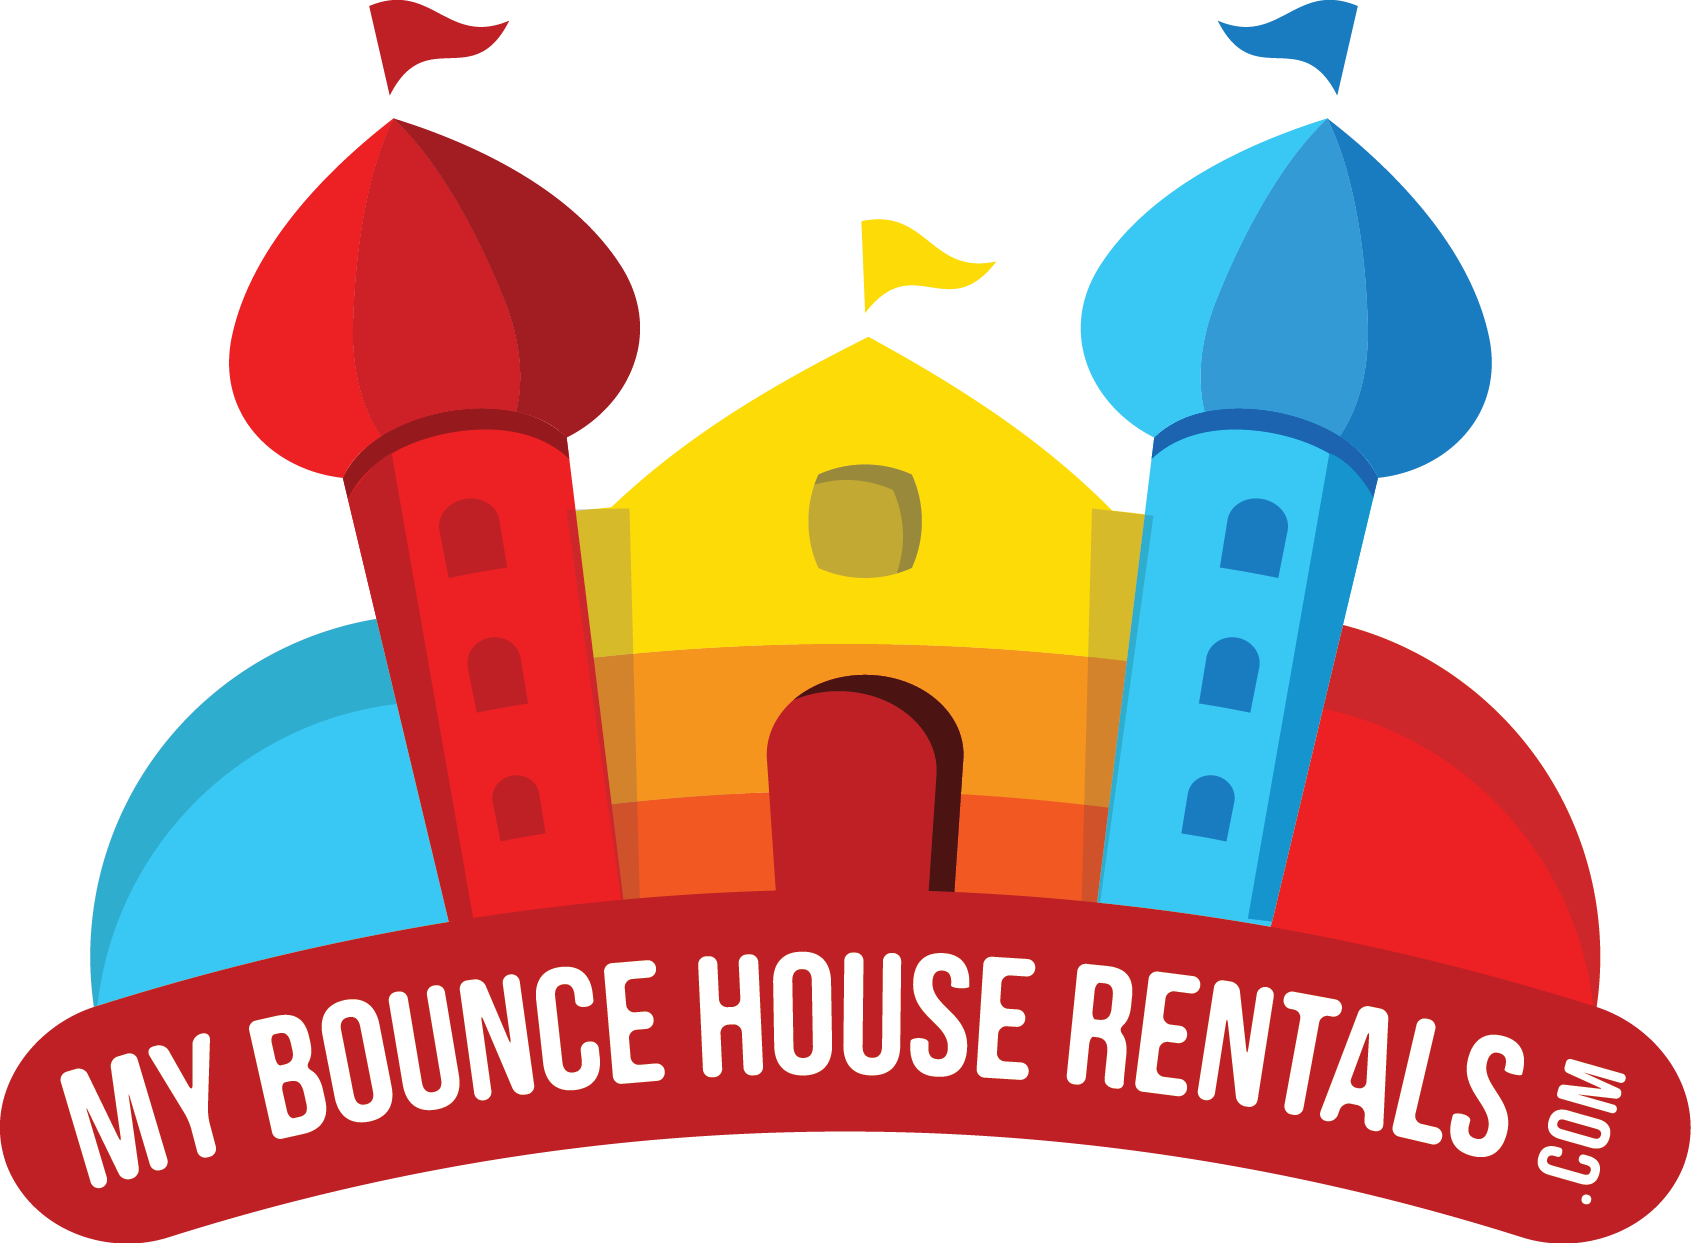 My Bounce House Rentals of Moreno Valley's Logo